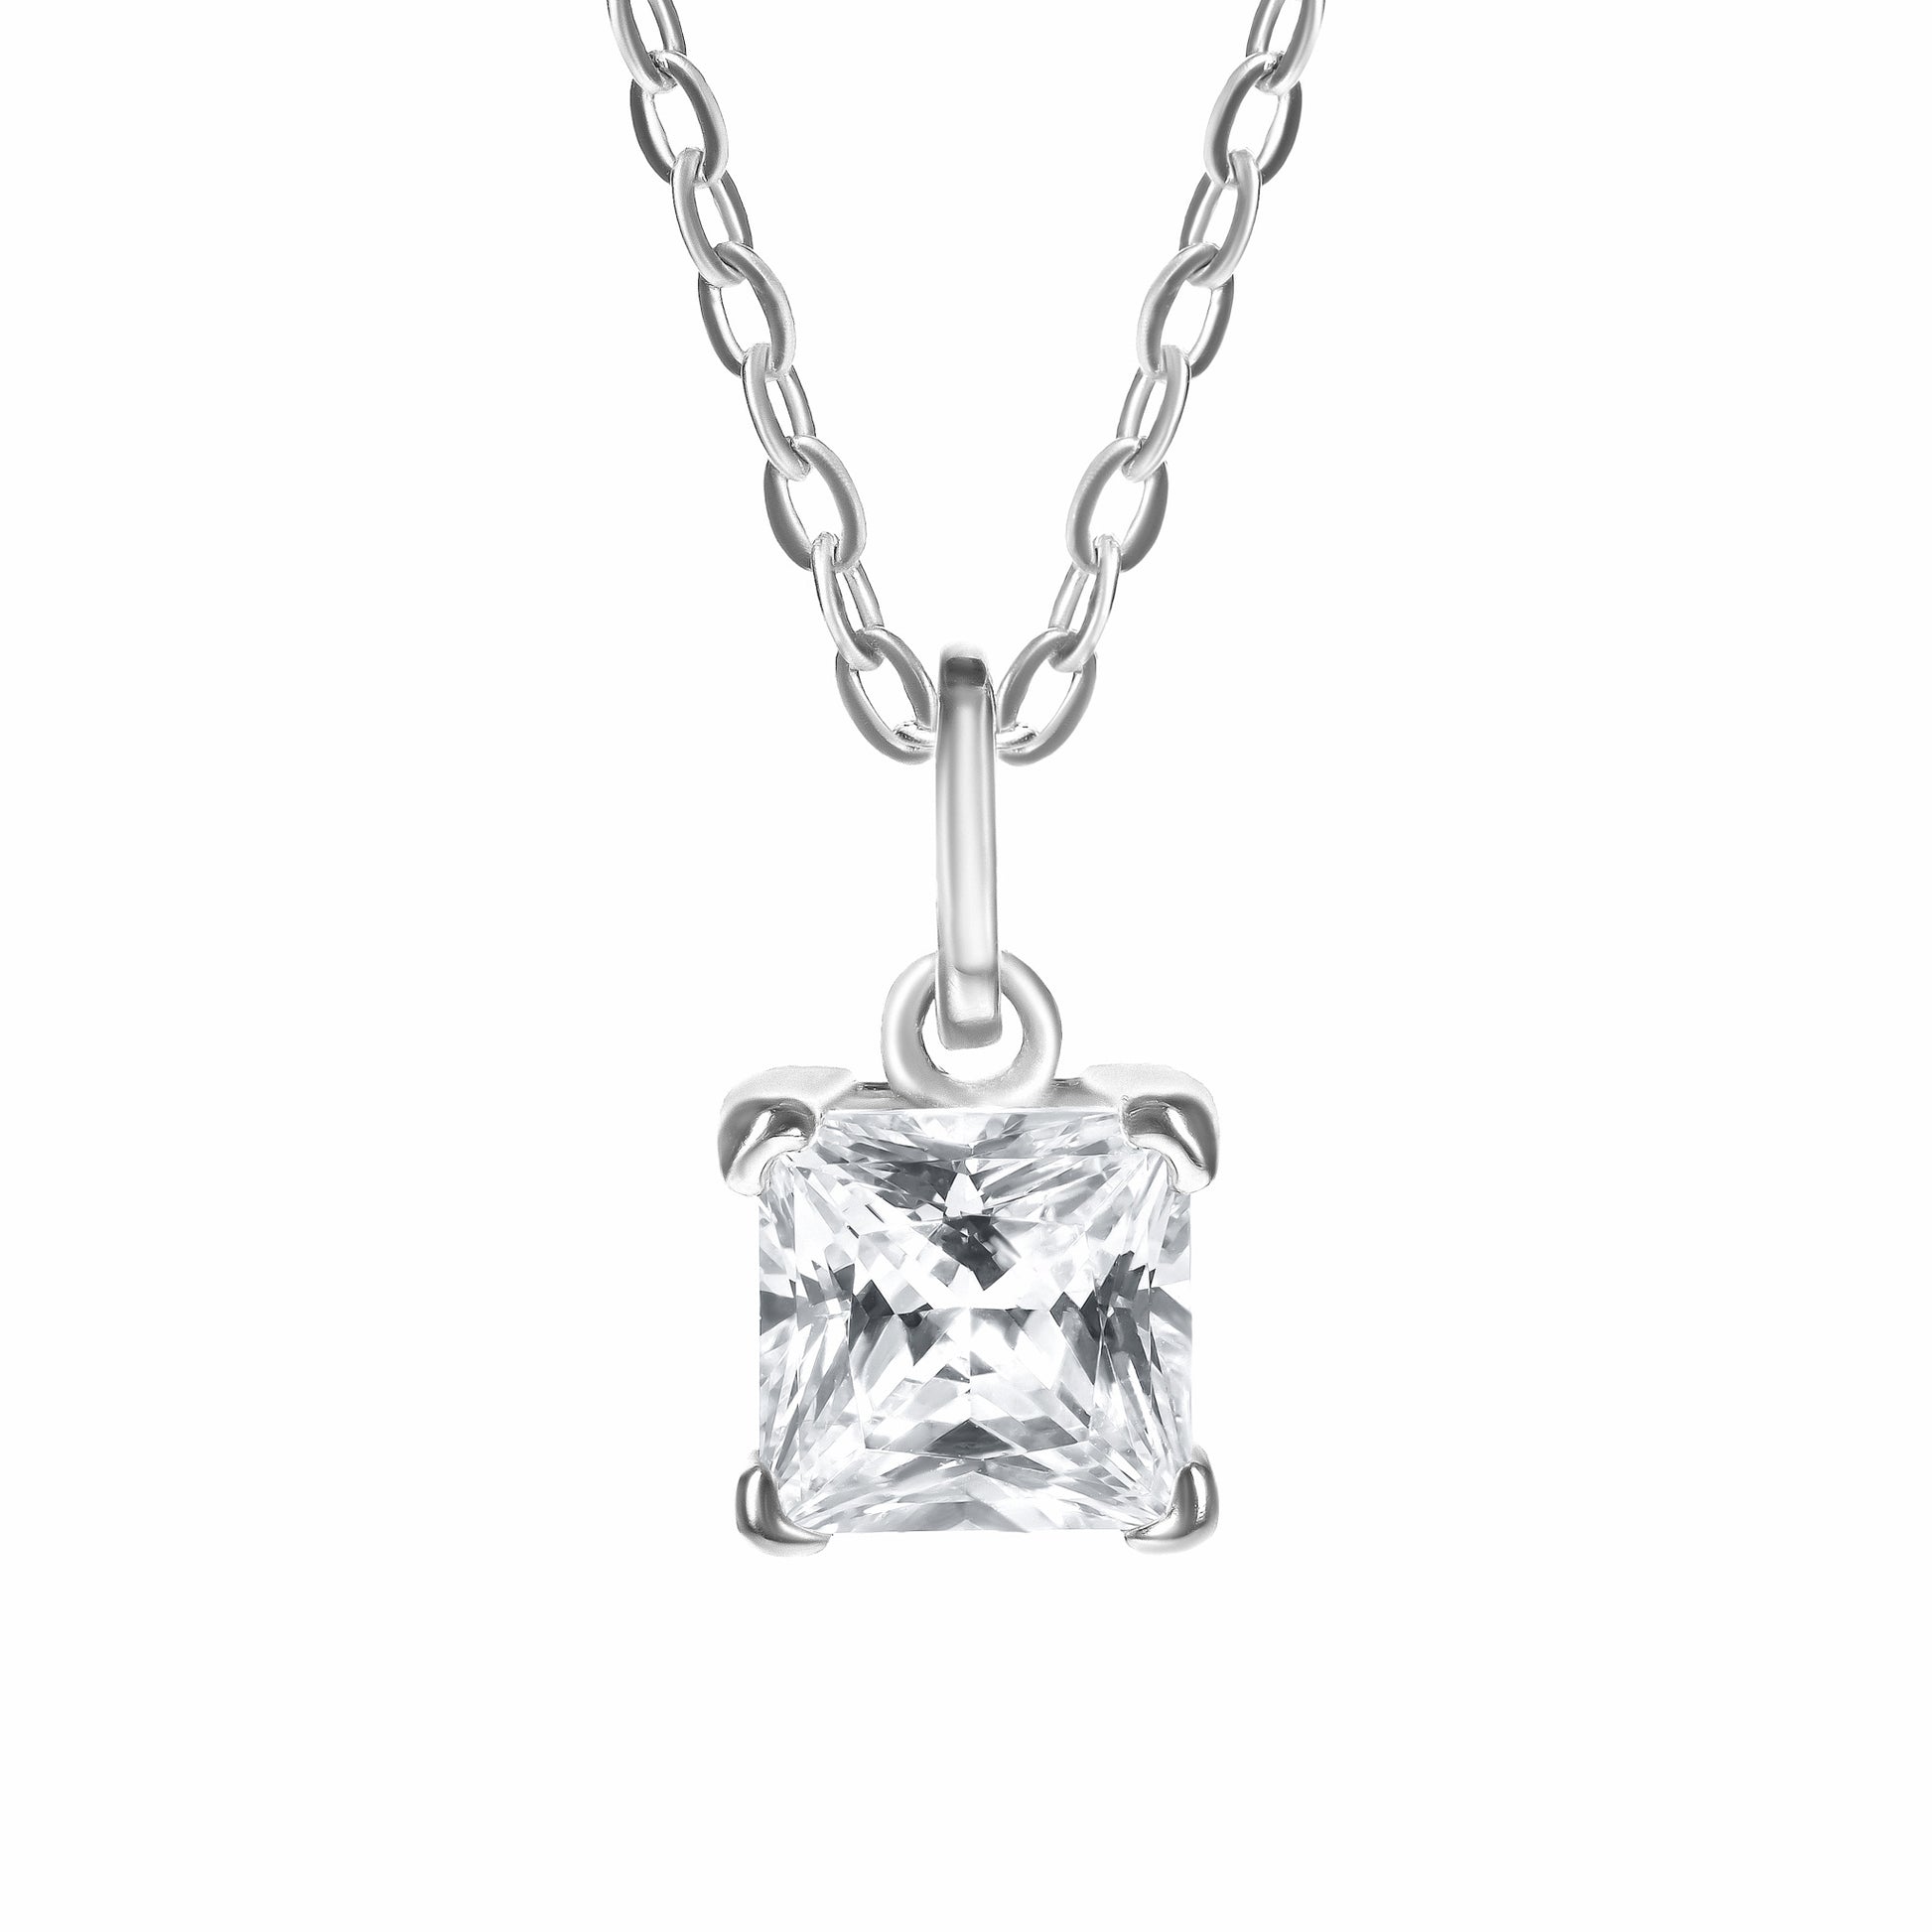 Princess Cut Silver Necklace on white background